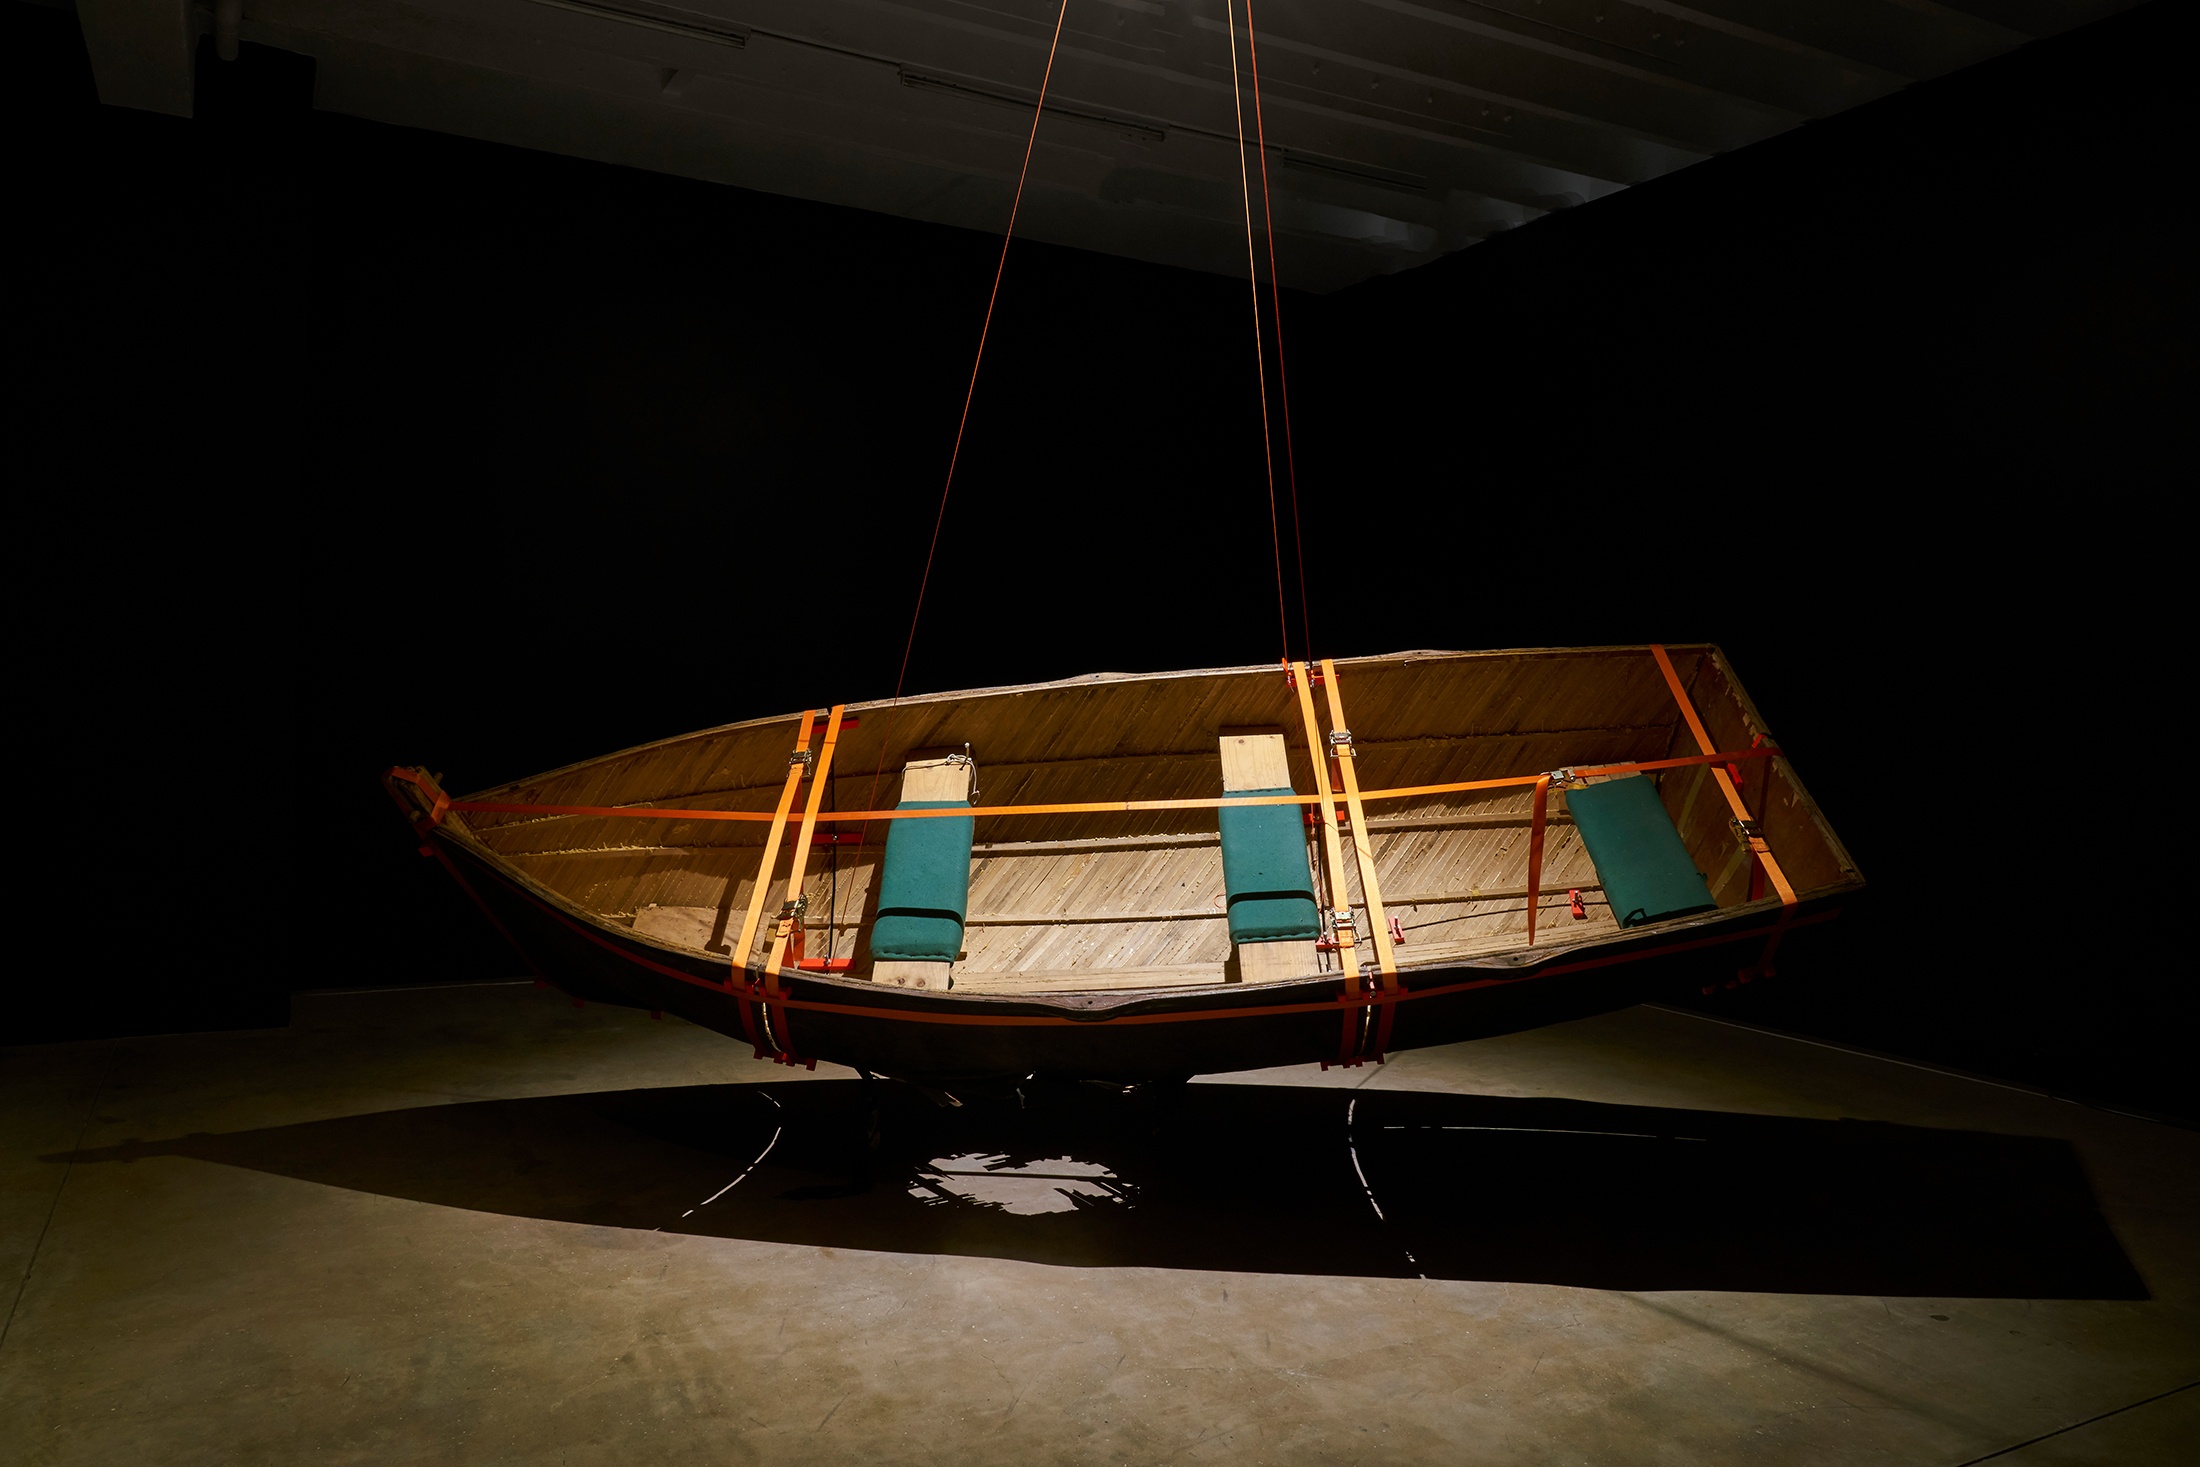 Installation photograph from the ‘Risk’ exhibition in A4’s Gallery. In the middle Gimberg Nerf’s mixed media installation ‘Escape to Robben Island (Angasi Nkosi Angasi Nkosi)’ consists of a wooden rowing boat suspended from the ceiling, tilted towards the viewer.
